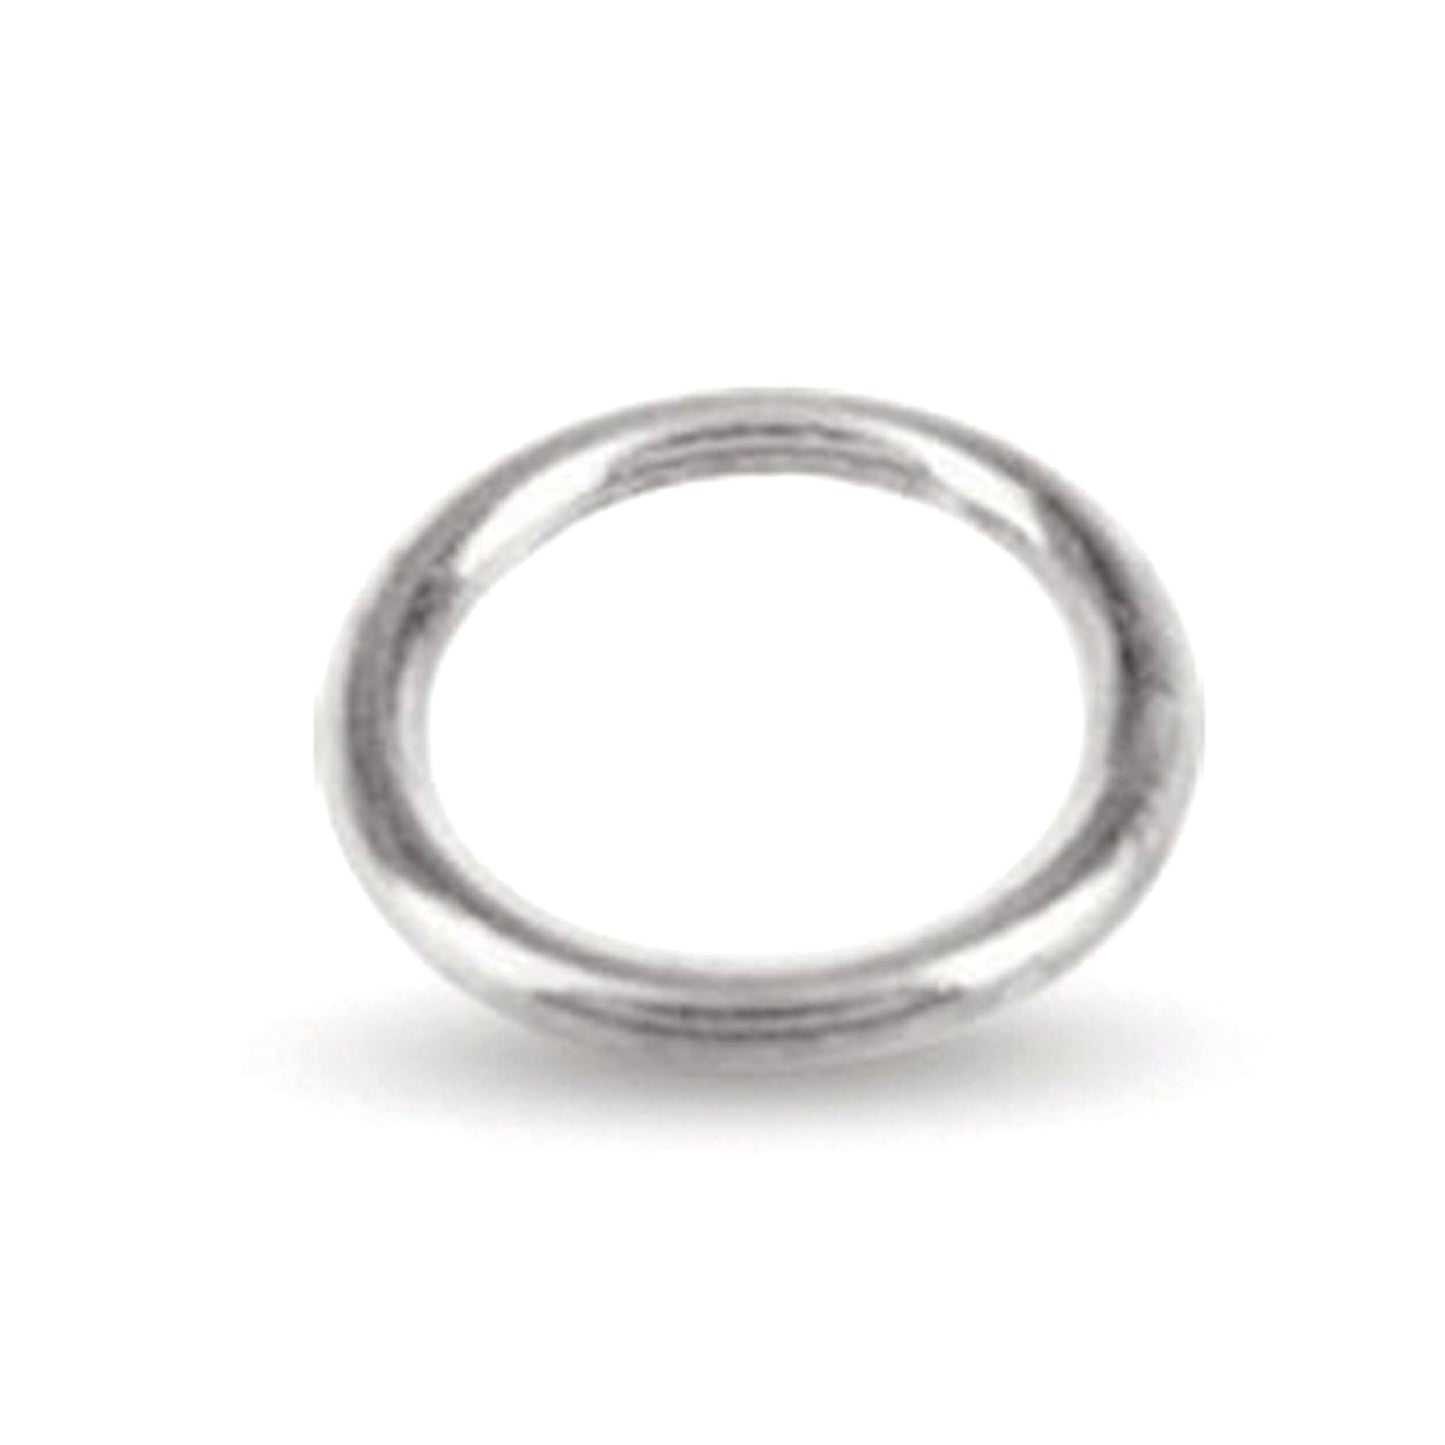 Jump Rings - 6mm x 0.8mm Thickness Closed | SS-JR6C8 | Jewellery Making Supply